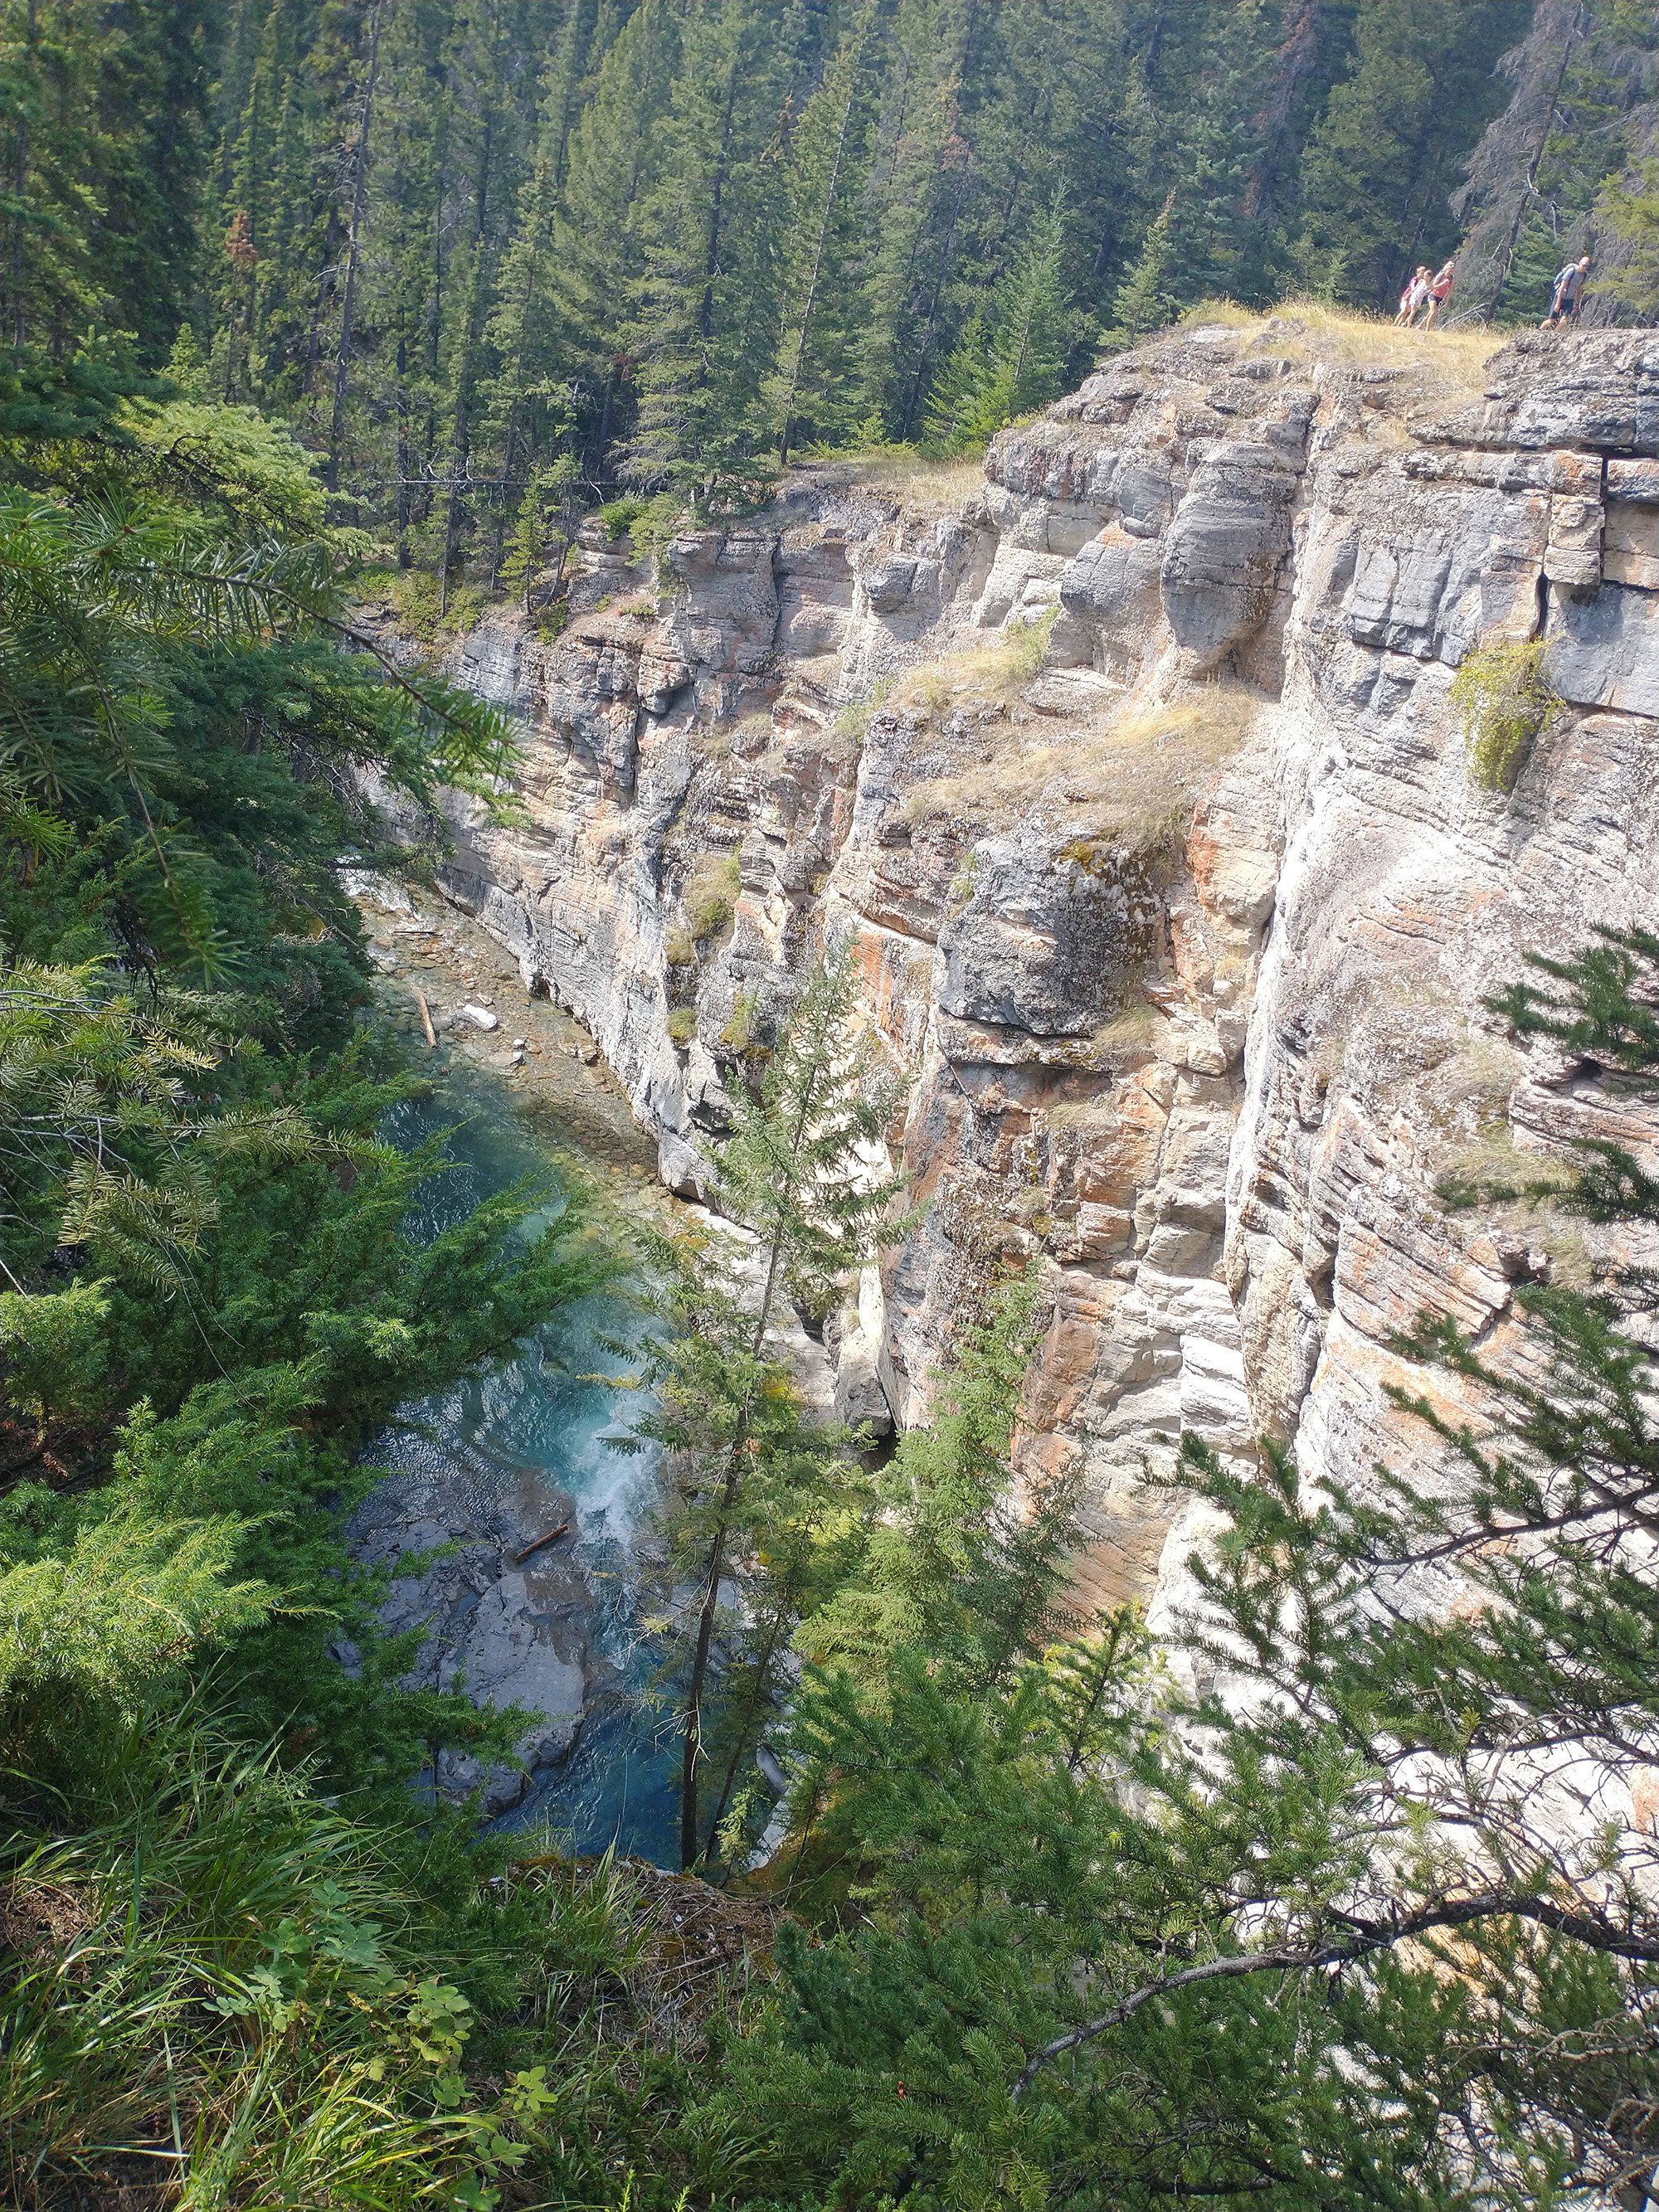 First stop was Maligne Canyon, early on in the climb.